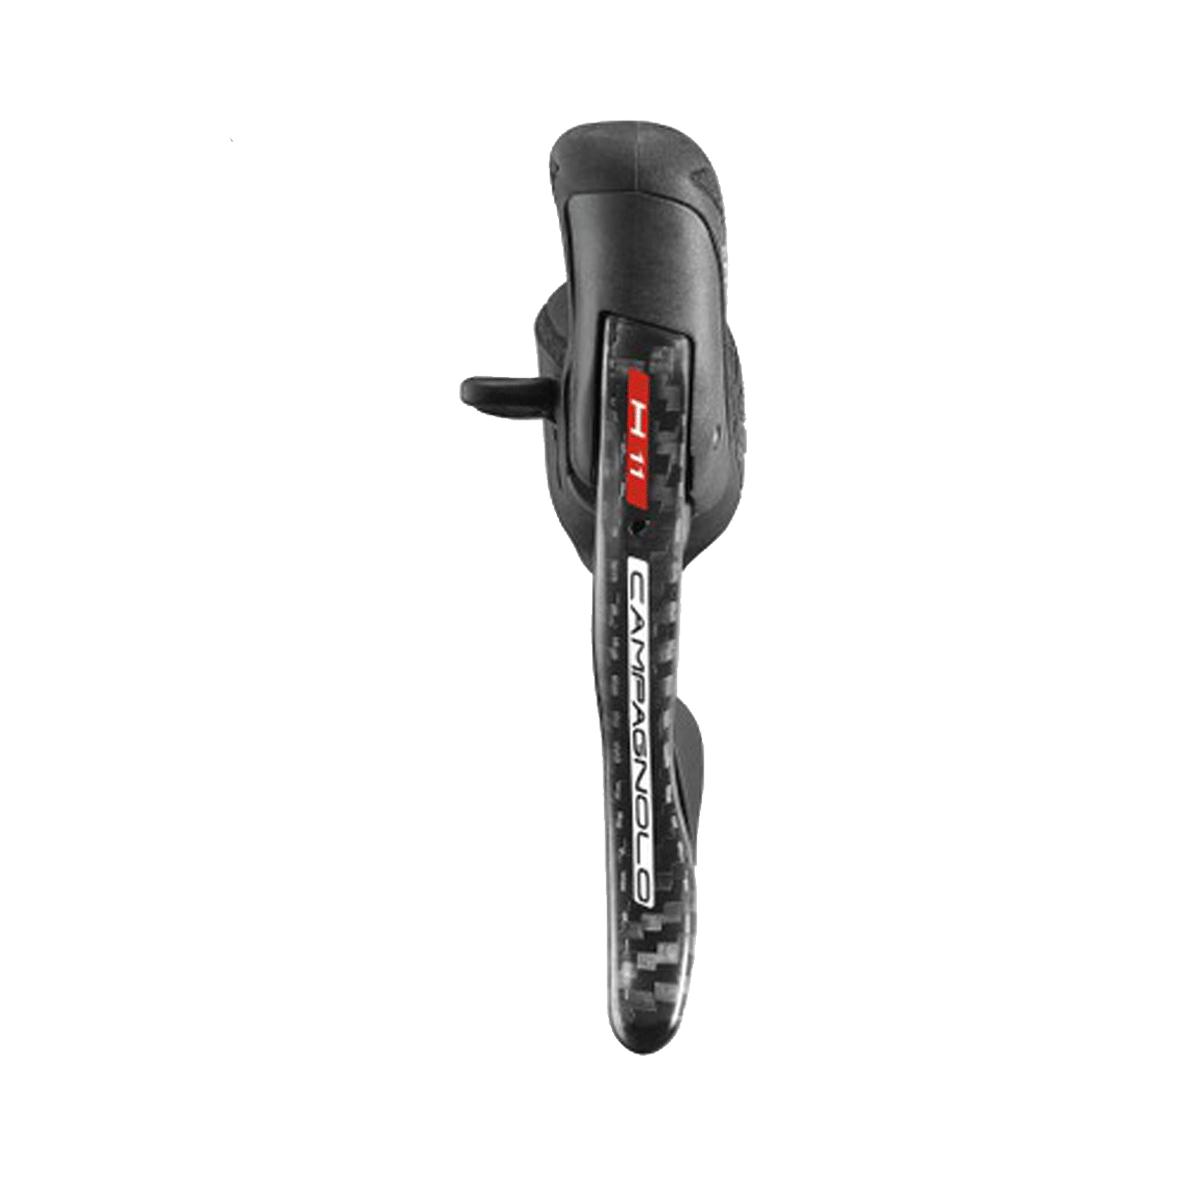 CAMPAGNOLO H11 Ergopower Right Shift-Disc Brake Lever With 160mm Front Caliper And Bolts